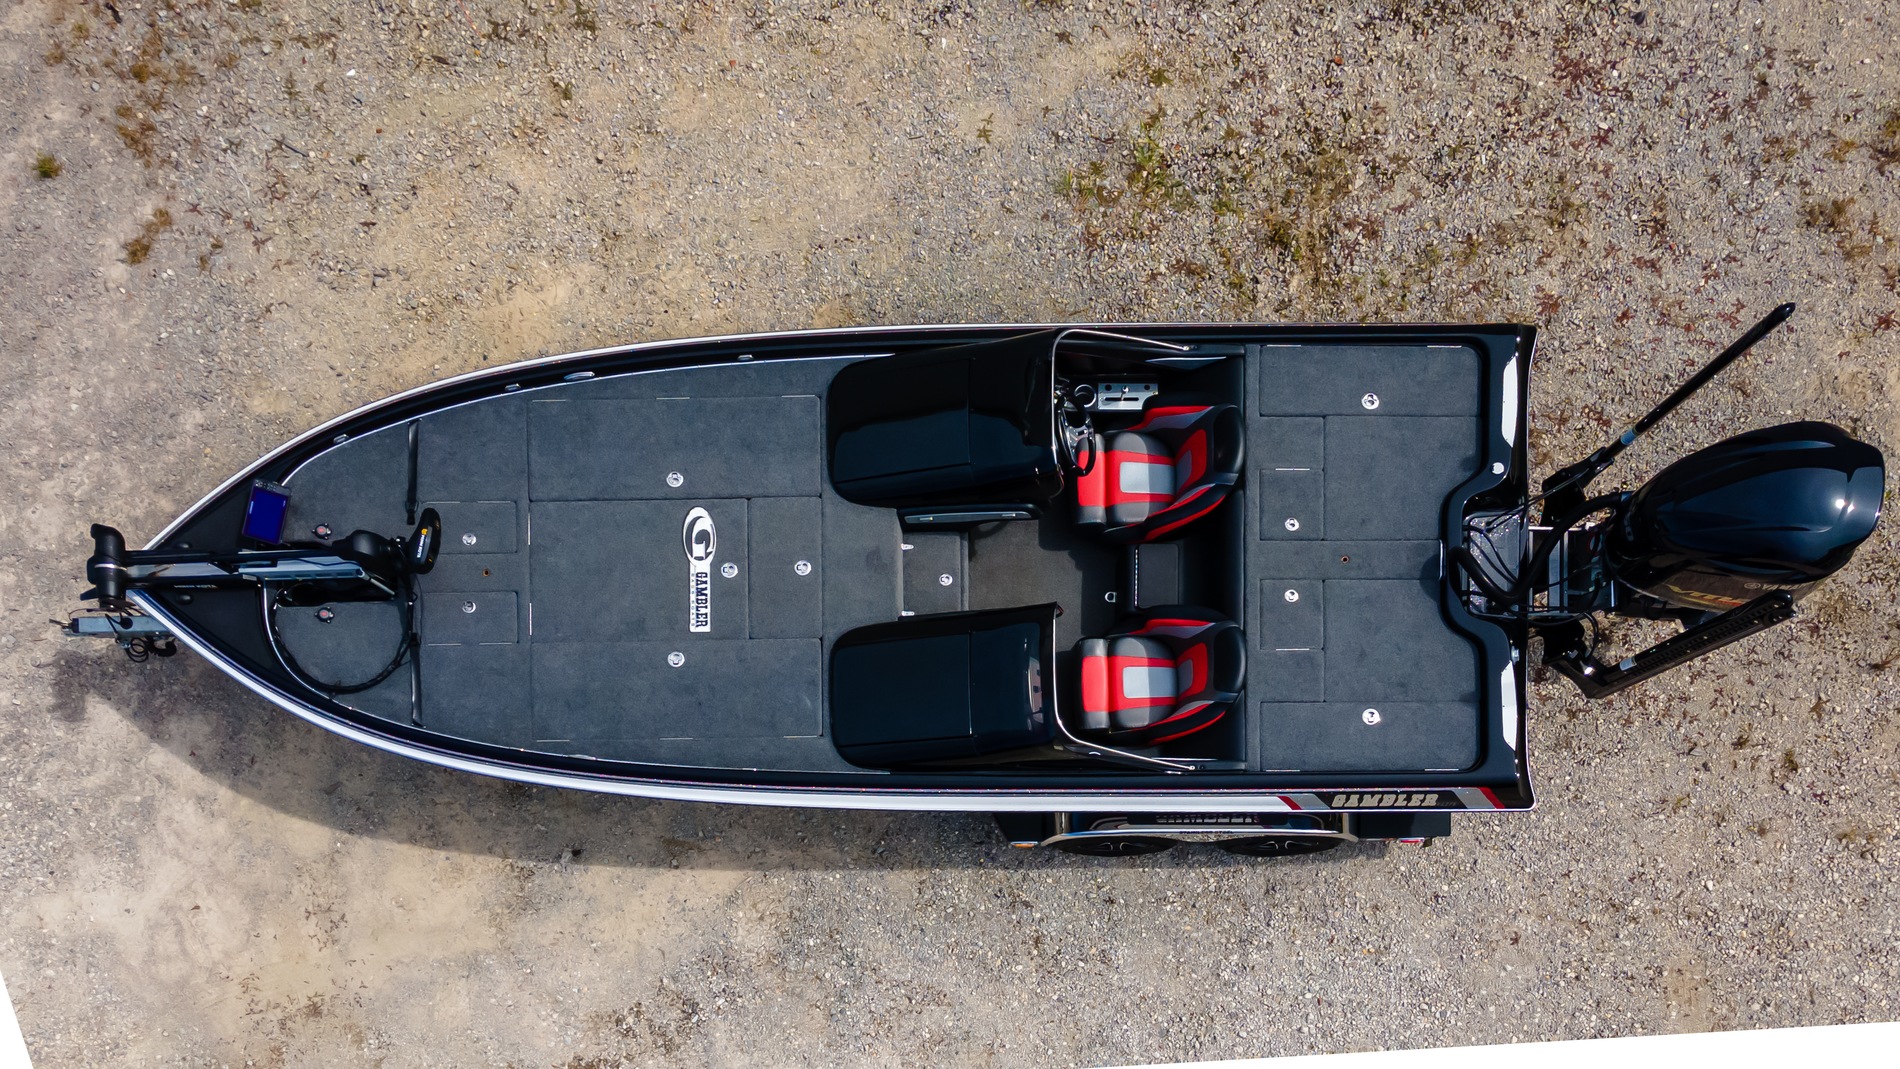 MORE THAN JUST A BASS BOAT. About The Gambler Elite